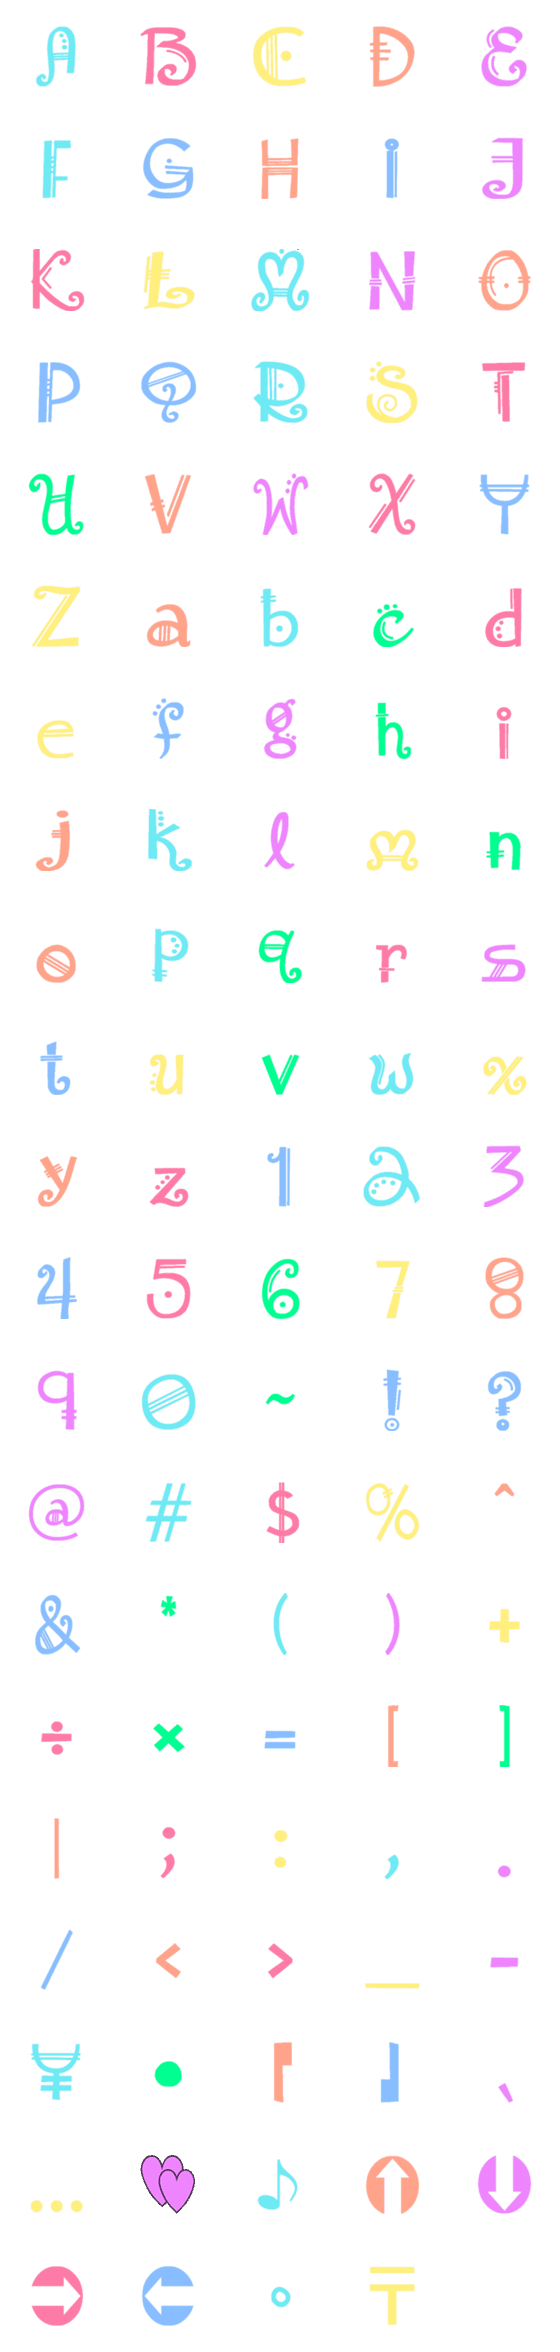 [LINE絵文字]Aesthetic Letter and Numbers (colorful)の画像一覧